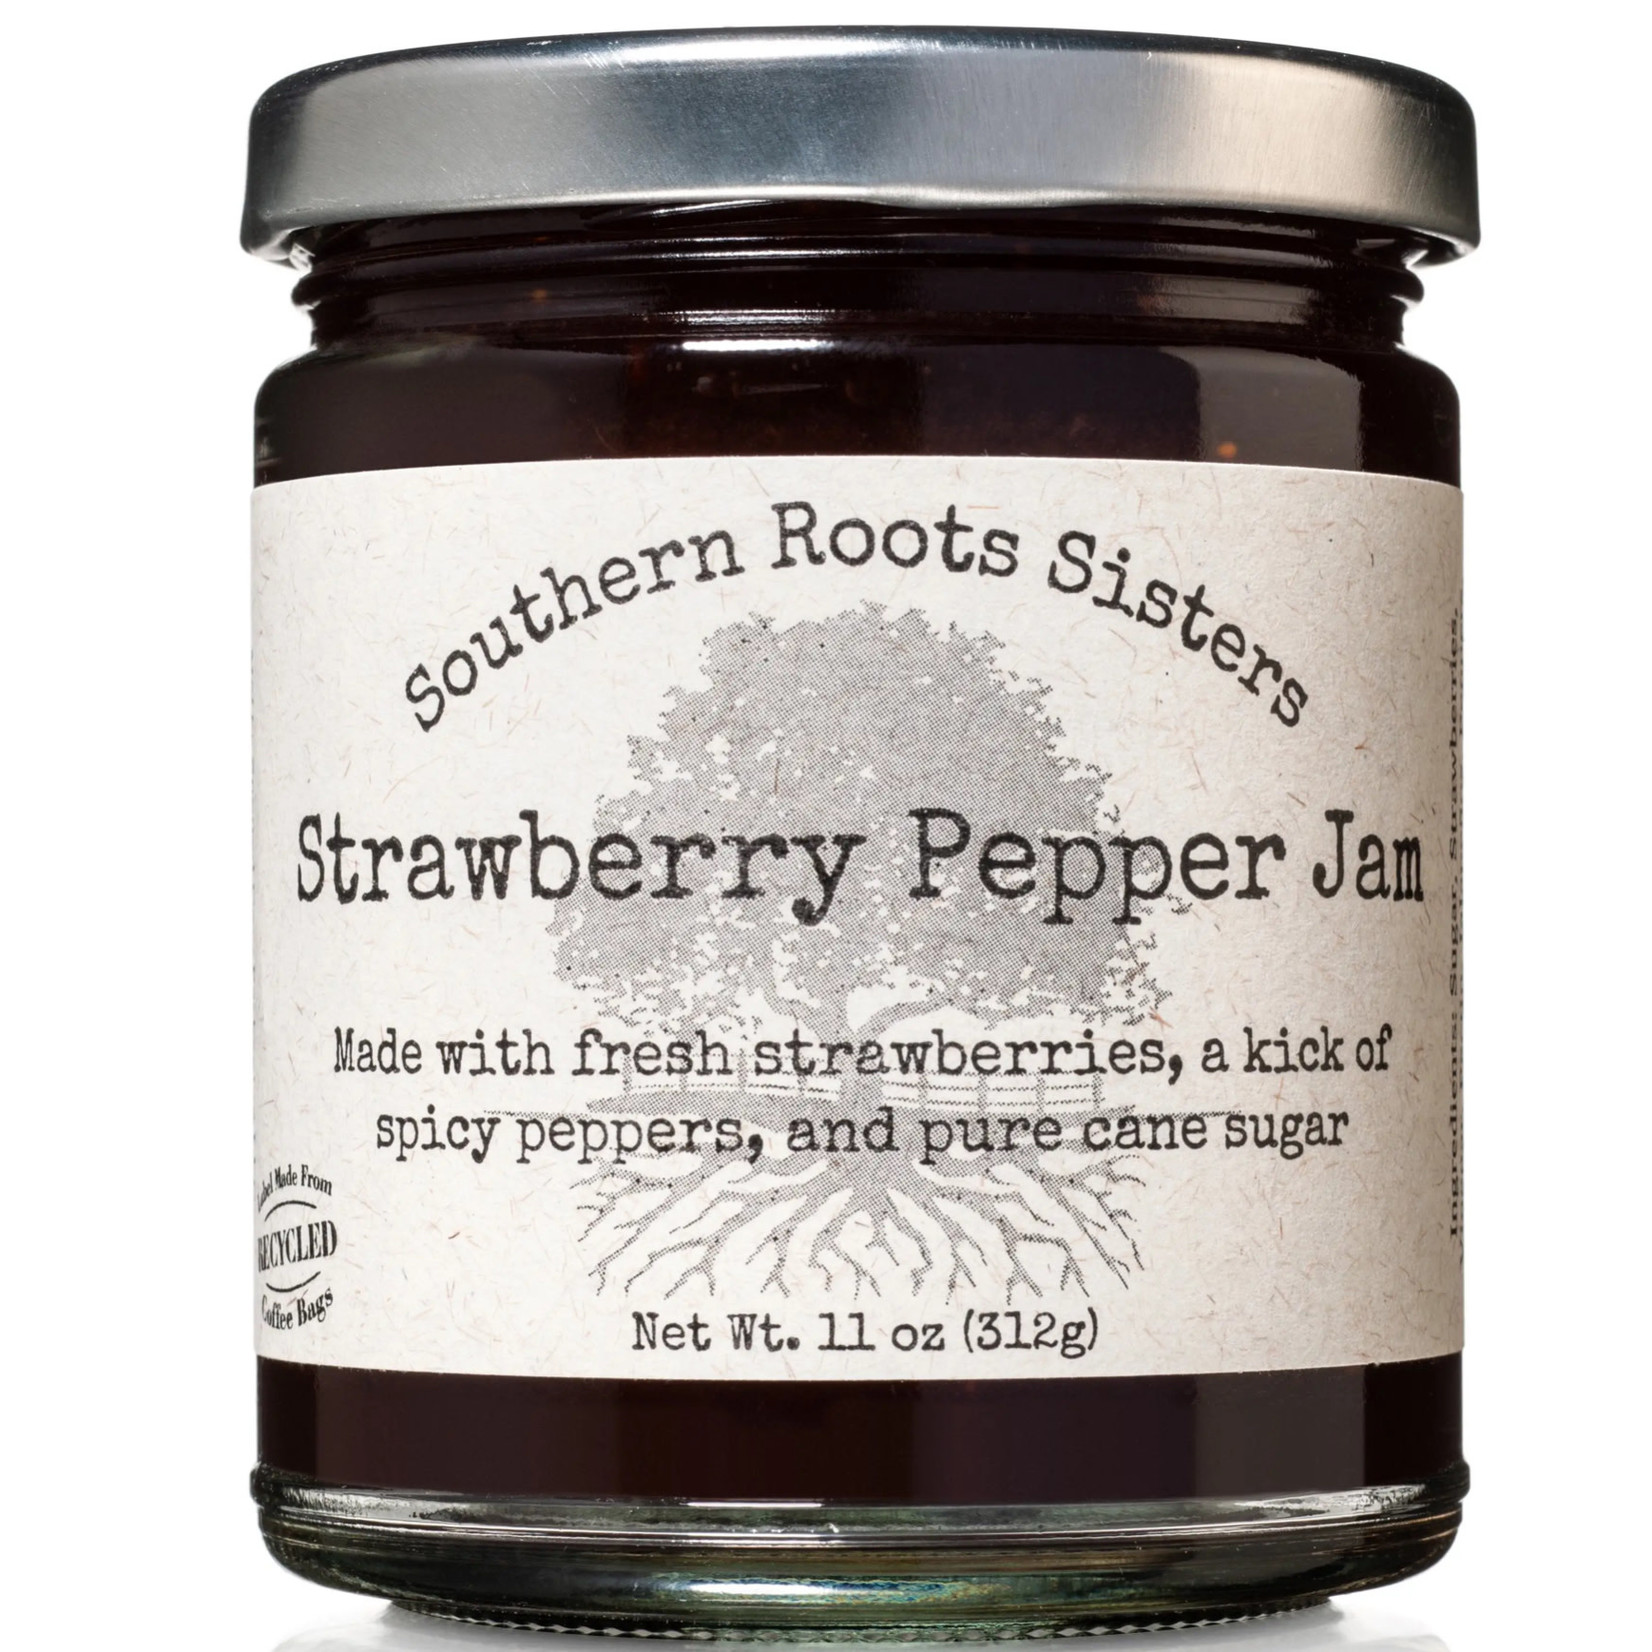 Southern Roots Sisters Strawberry Pepper Jam 11 OZ